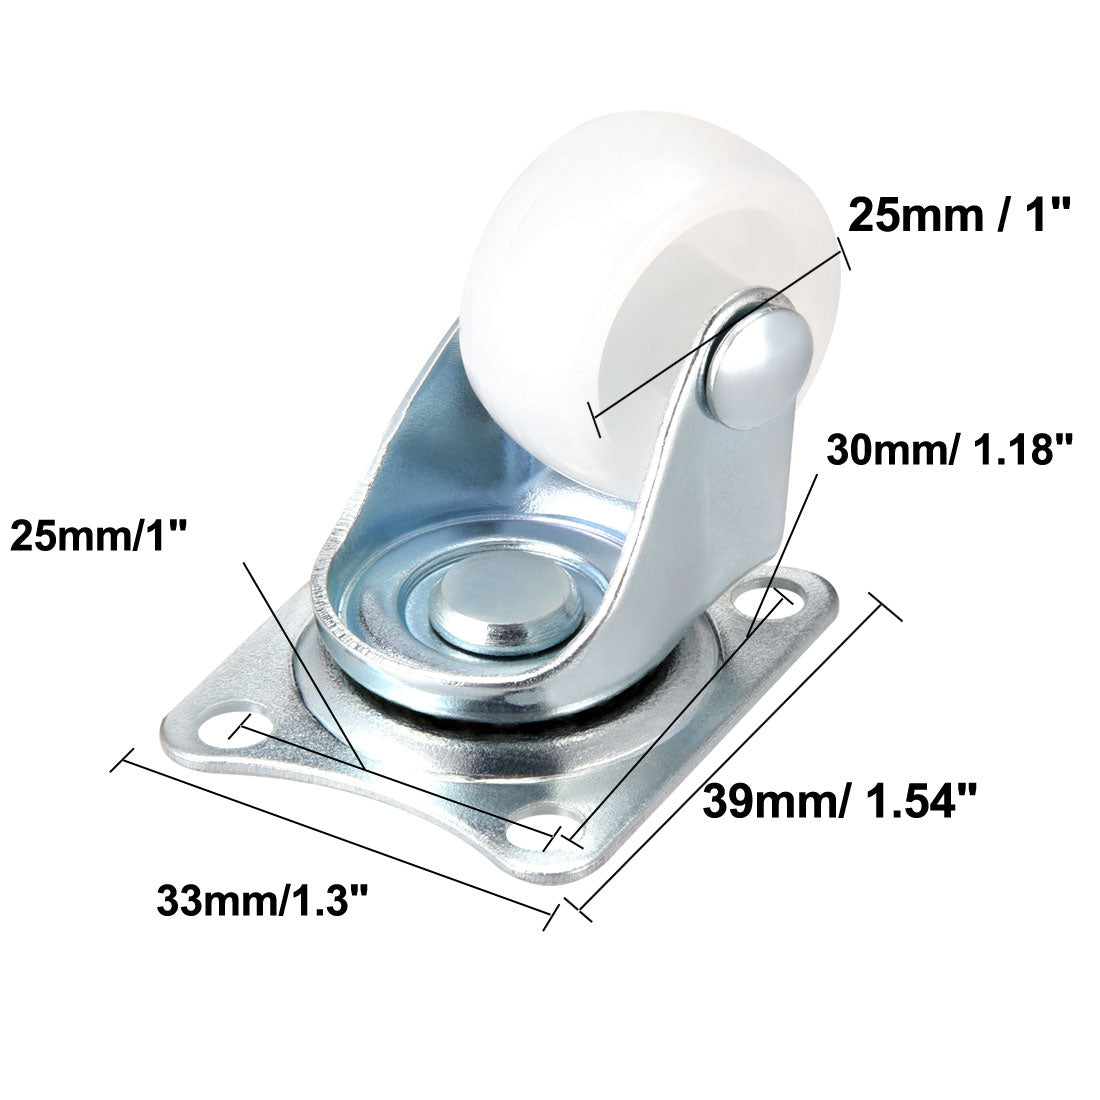 Uxcell Uxcell 1 Inch PP Top Plate Mounted Caster Wheel 11lb Capacity 4 Pcs (2 Pcs Swivel, 2 Pcs Fixed)